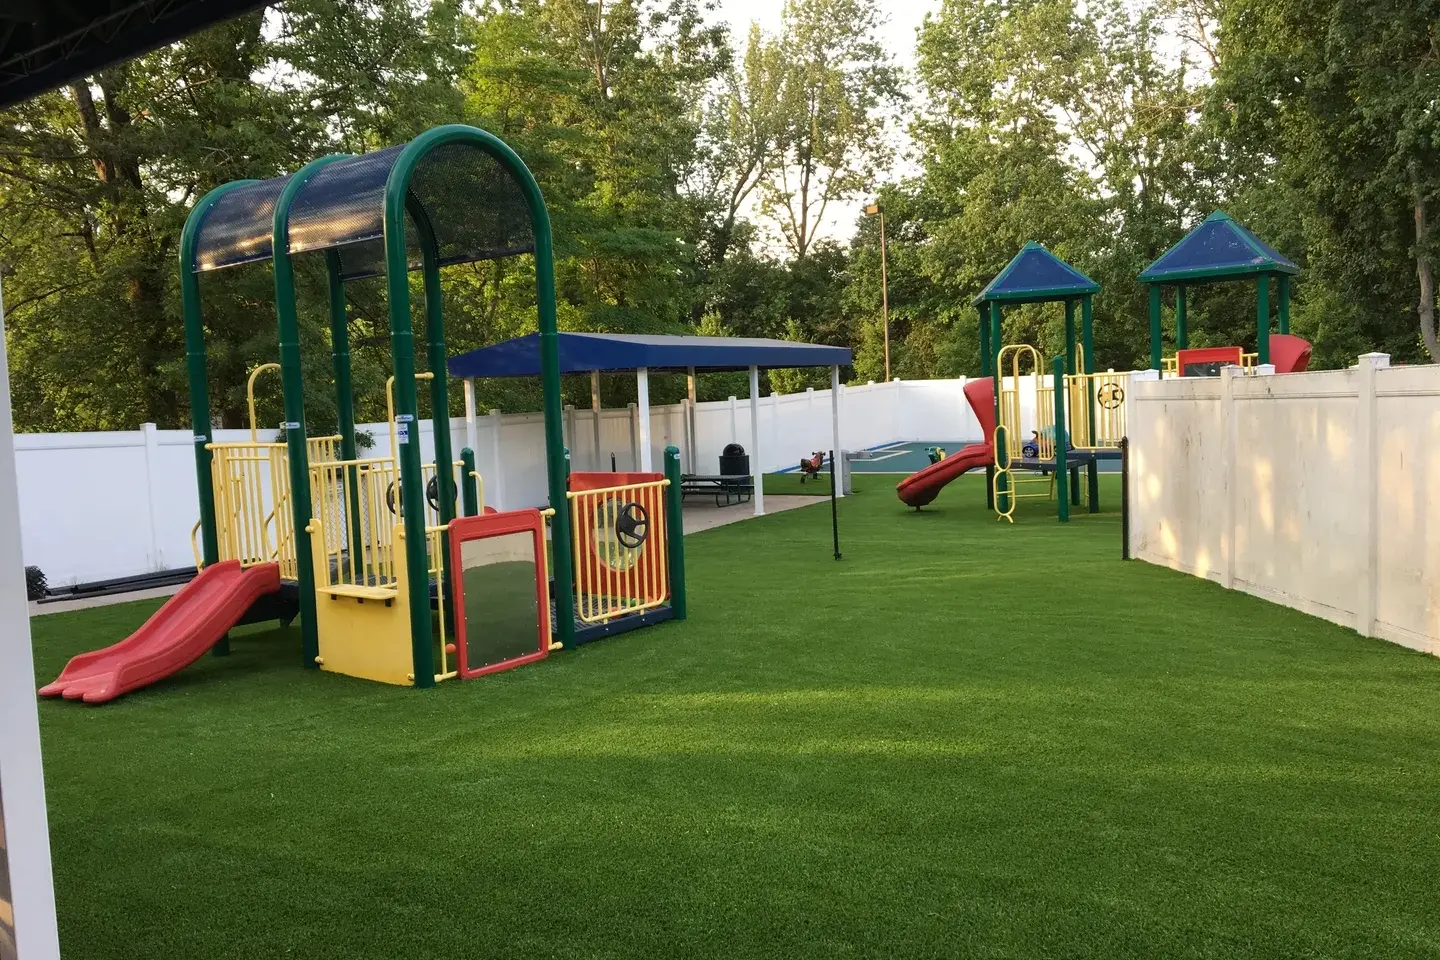 A playground with many different types of play equipment.